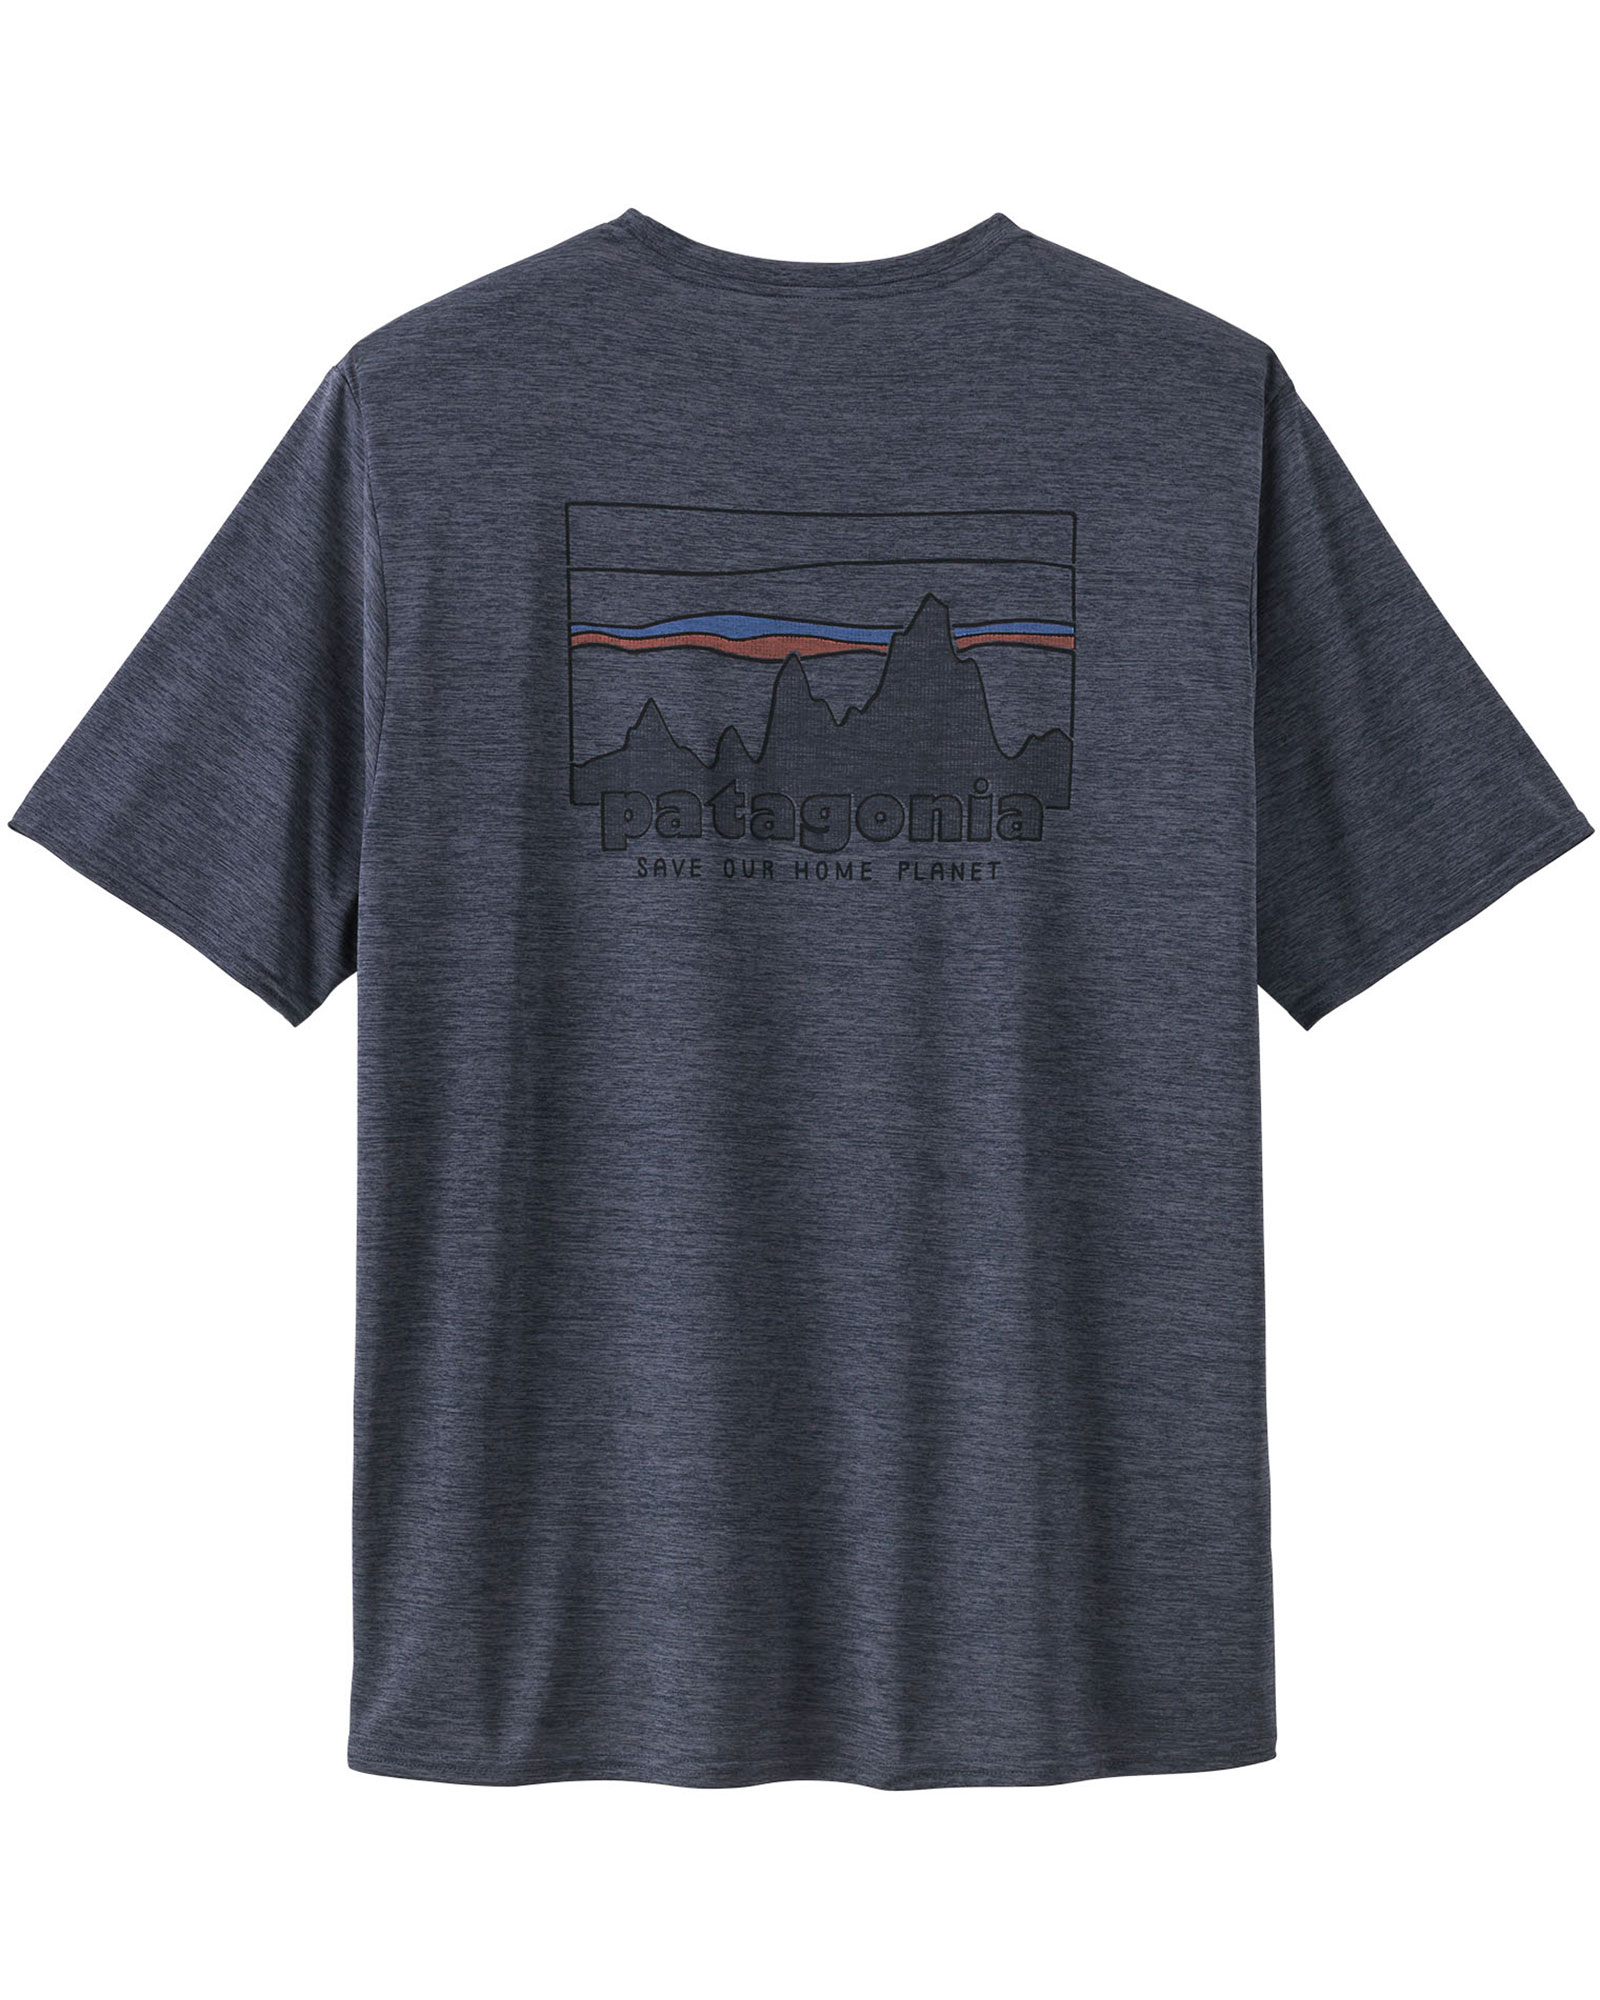 Patagonia Cap Cool Daily Graphic Men’s Tee - Smolder Blue/73 Skyline S